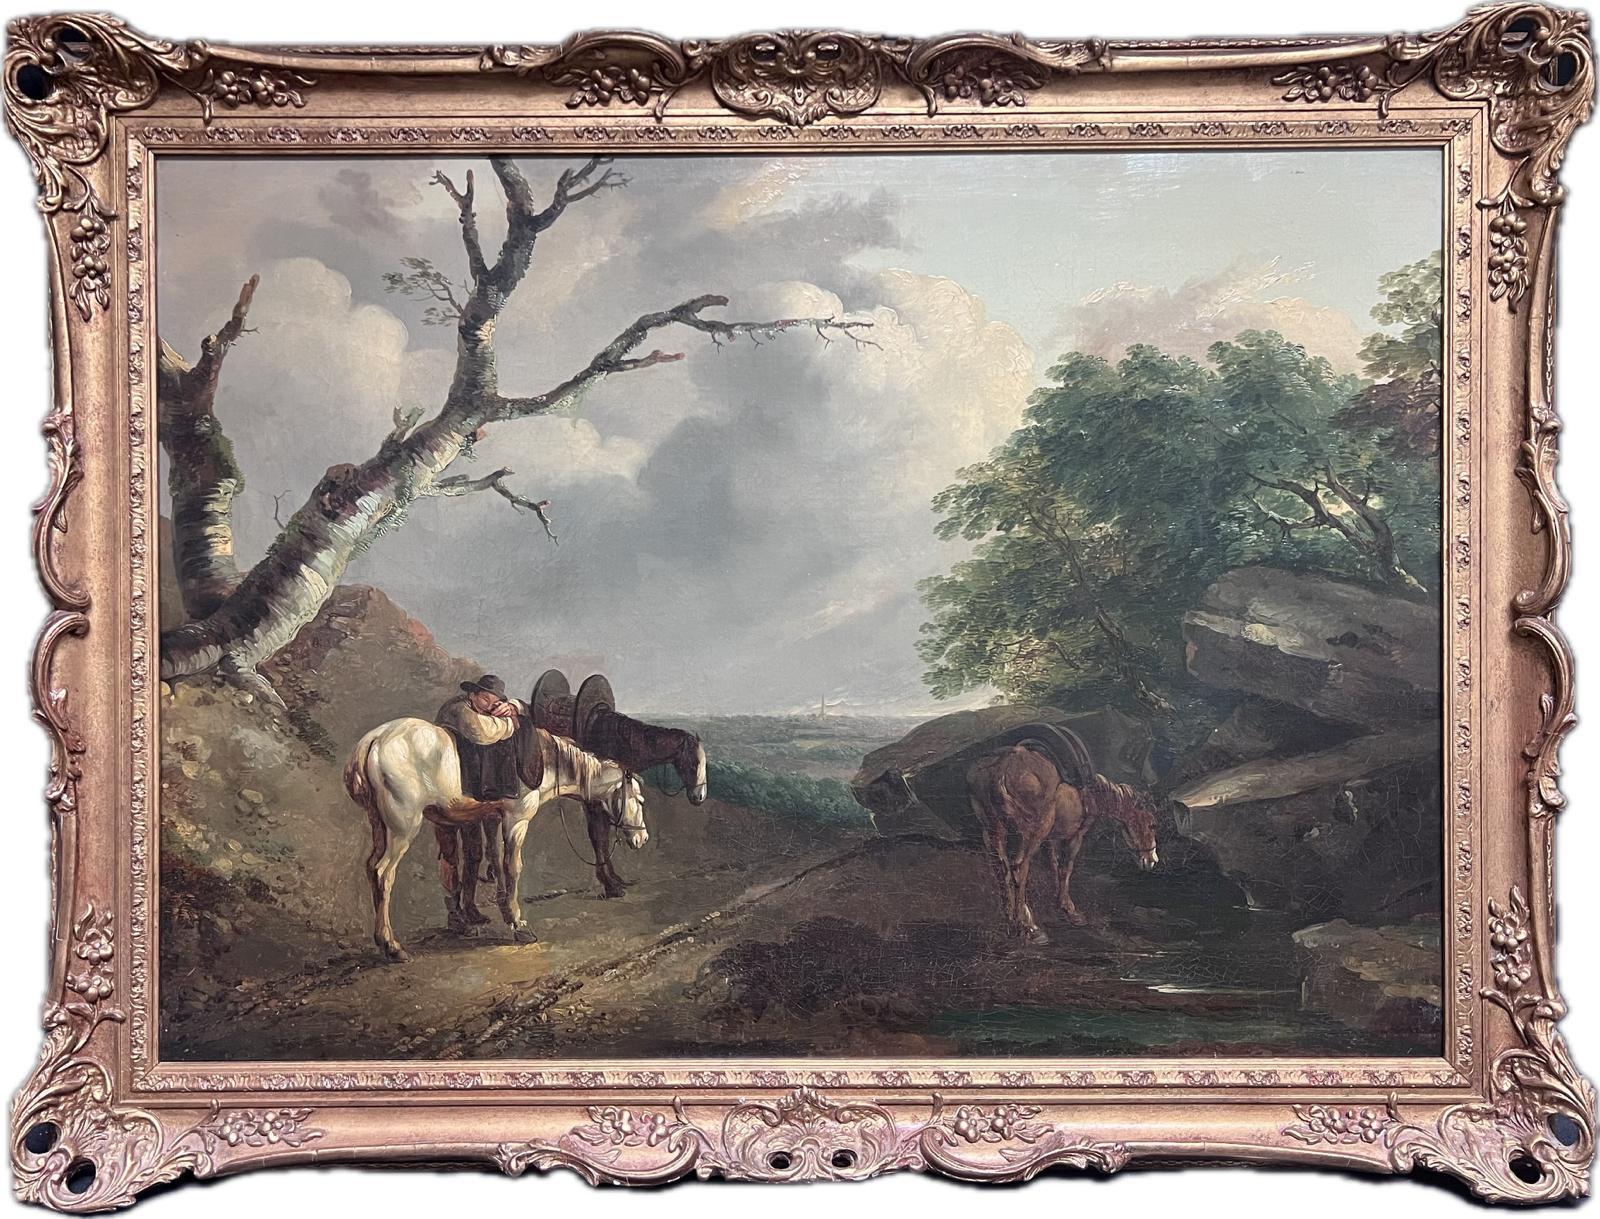 Thomas Barker of Bath Landscape Painting – Großes englisches Ölgemälde „Man with Horses Resting“, Panoramic Country View, 1800er Jahre